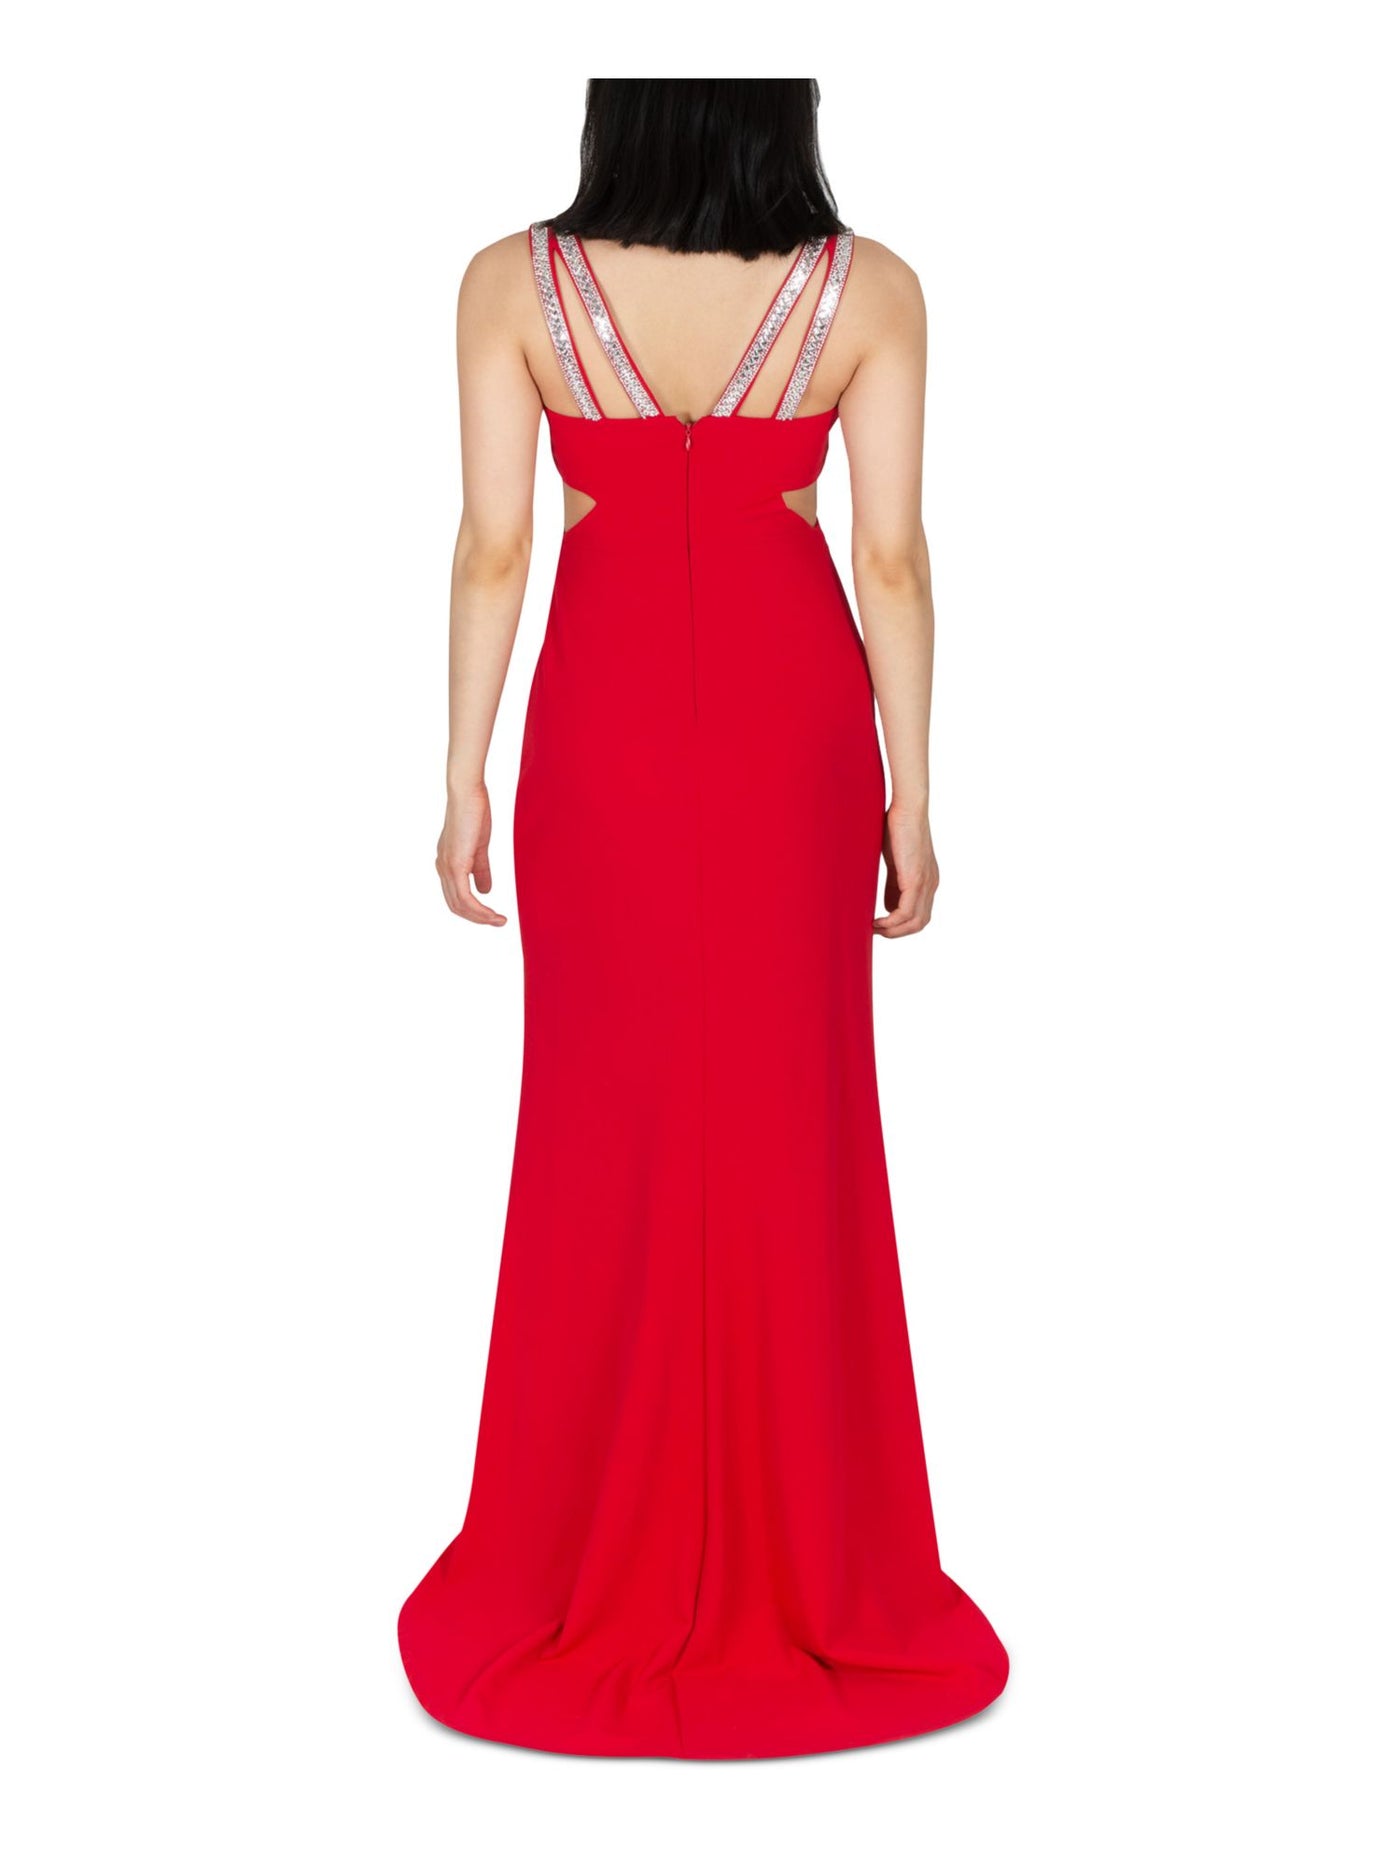 DEAR MOON Womens Red Stretch Zippered Slitted Embellished Double Straps Line V Neck Full-Length Prom Gown Dress 7